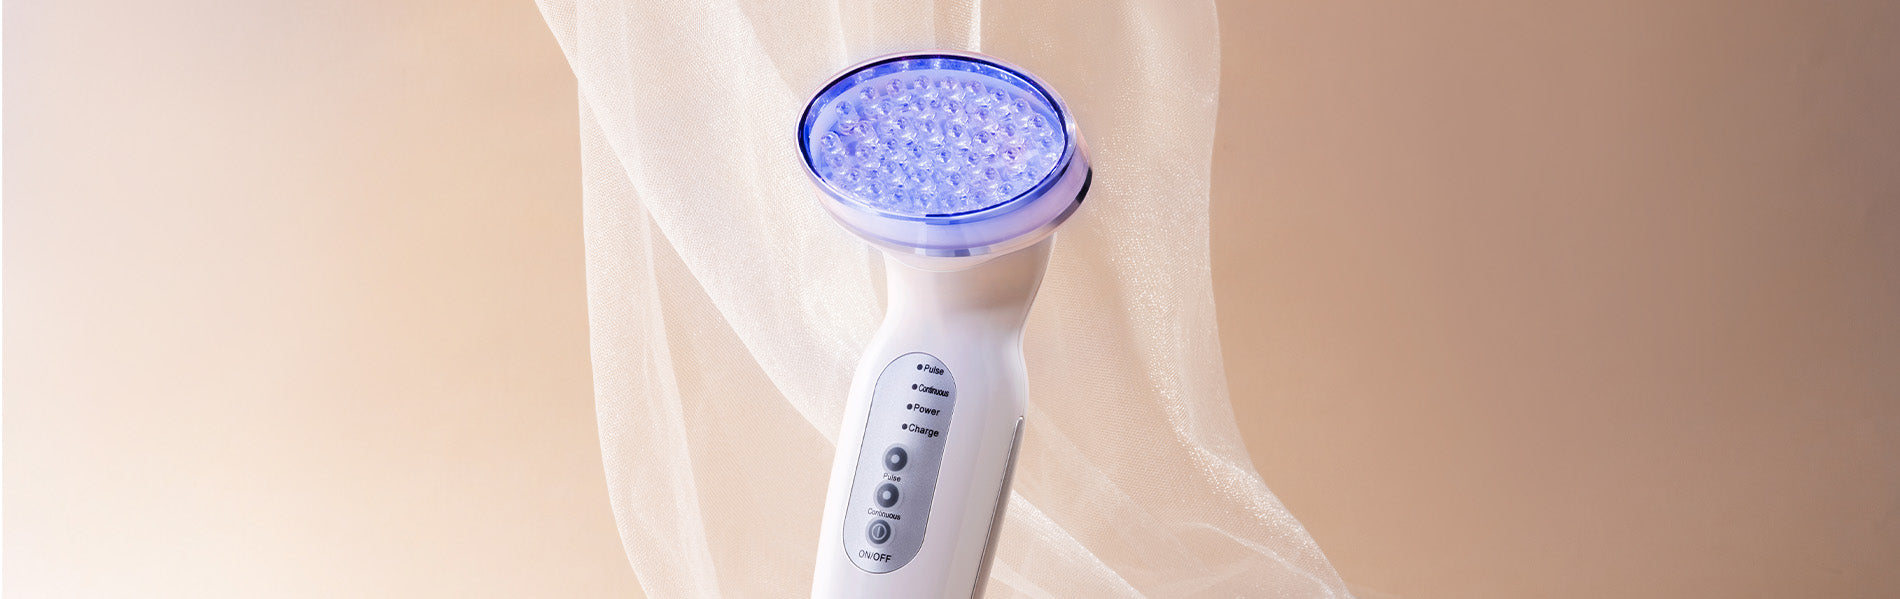 Blue Light, Brighter Skin: How LED Therapy is Revolutionizing Acne Treatment